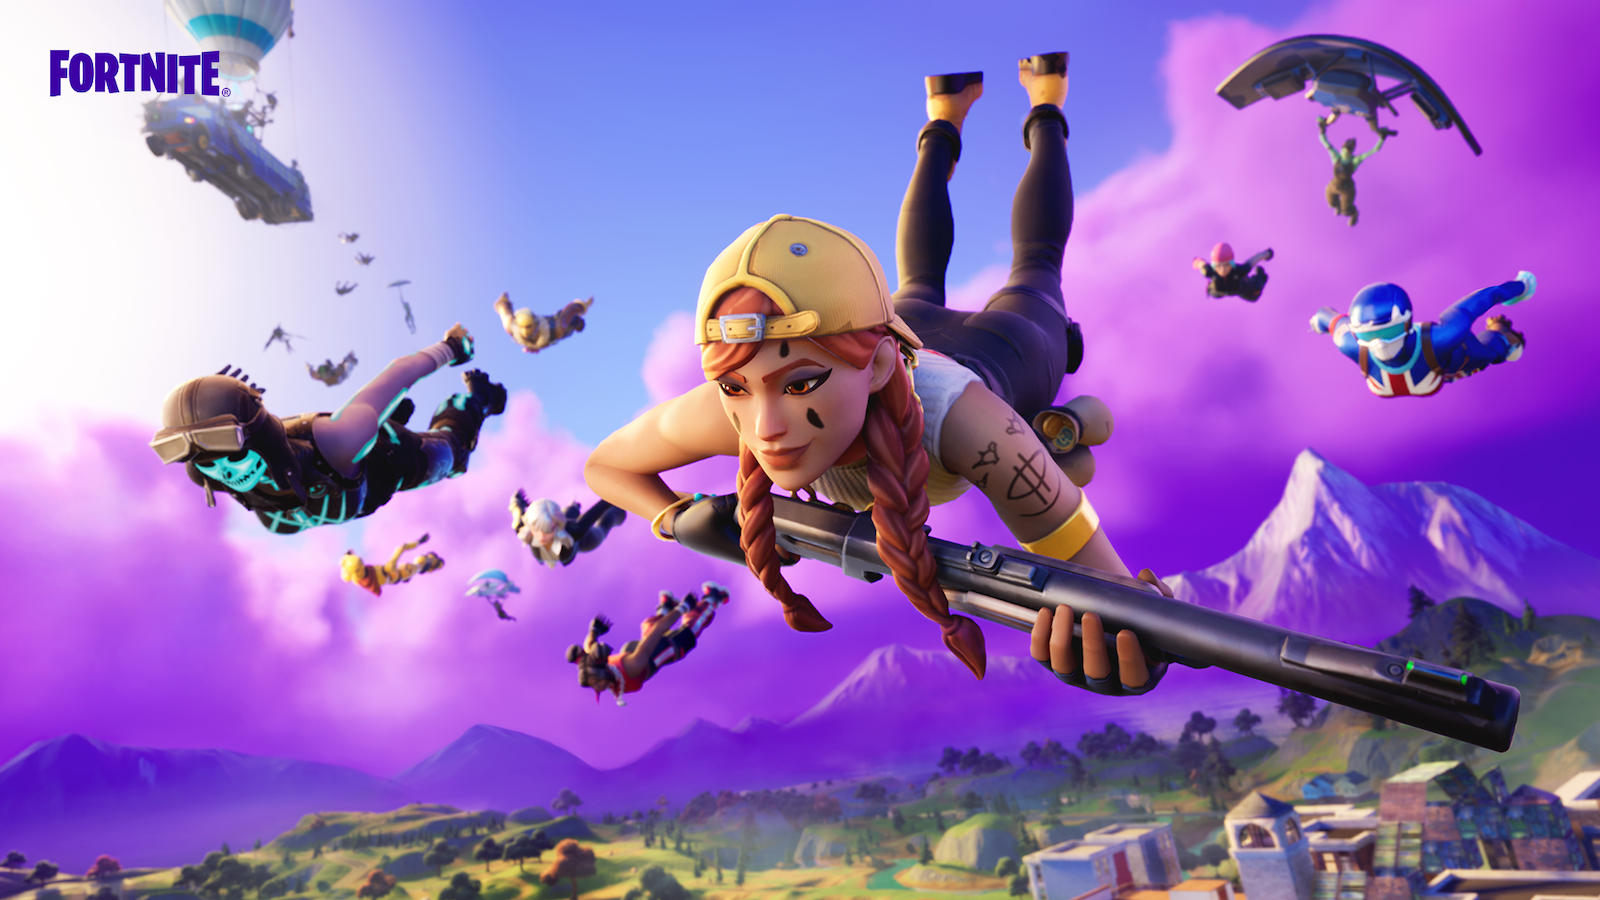 Ping issues are suddenly plaguing Fortnite players after v25.11 hotfix ...